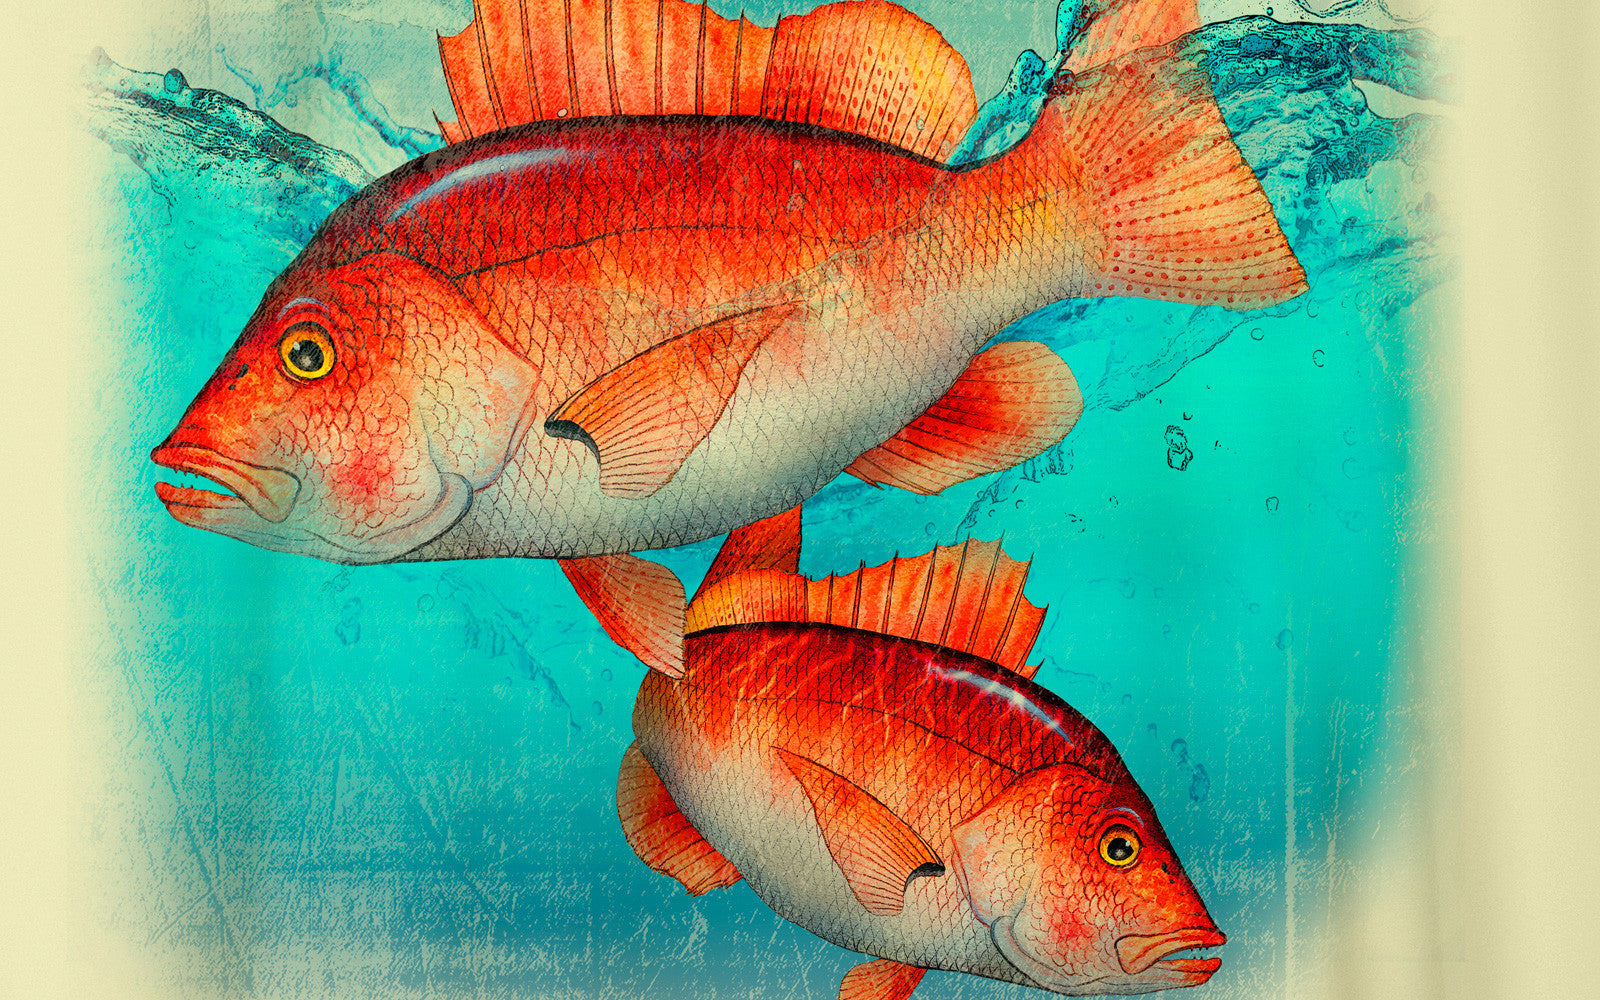 Colorful artistic rendering of two Blackfin Snapper fish